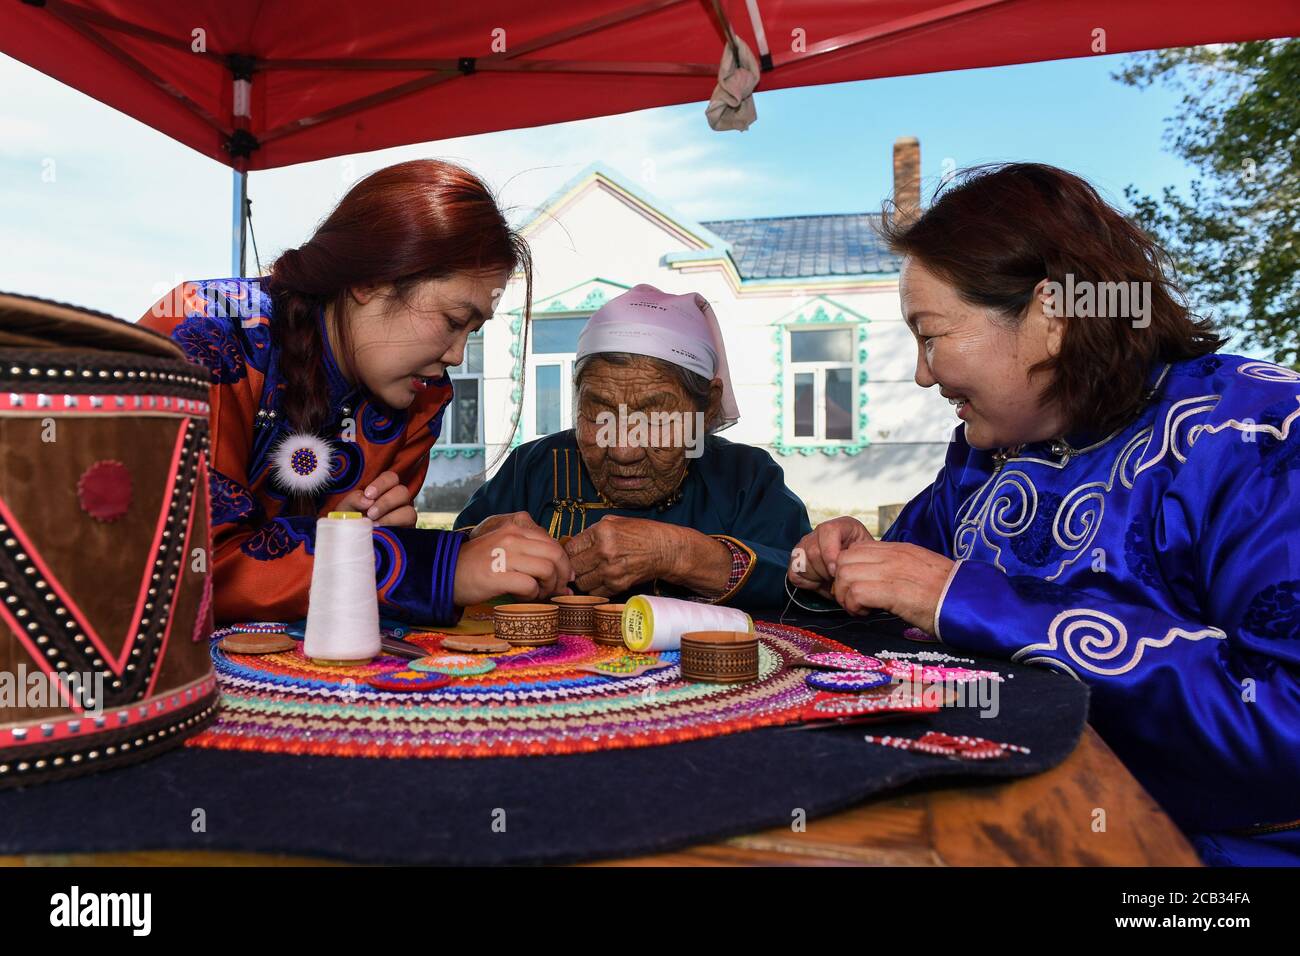 (200810) -- HULUN BUIR, Aug. 10, 2020 (Xinhua) -- Aijim (L) learns the method of making 'Sun Flower' from her grandmother (C) in Ewenki Autonomous Banner, north China's Inner Mongolia Autonomous Region, Aug. 6, 2020.  Aijim is a post-90s girl of Ewenki ethnic group living in Inner Mongolia Autonomous Region. In 2014, she returned to her hometown at Ewenki Autonomous Banner, Hulun Buir City, after graduation from university, and helped her mother Uran run a handicraft studio. They make handicrafts themed on 'Sun Flower', and opened up online business to sell the products.     'Behind the handic Stock Photo